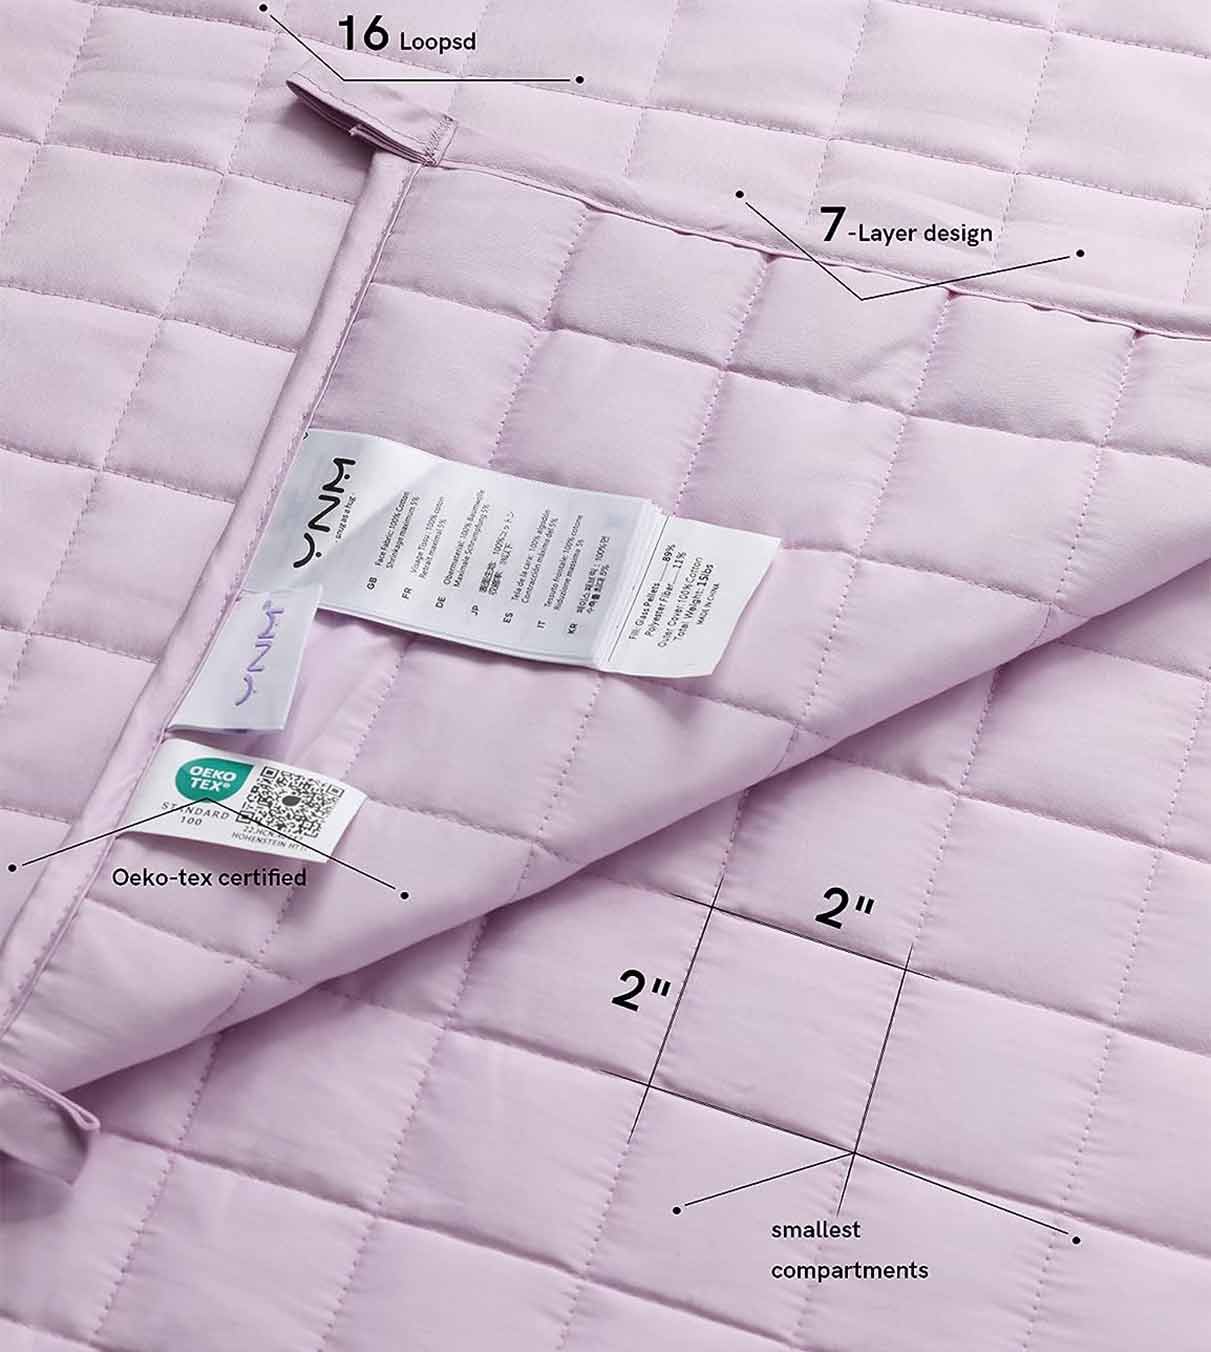 Product: 15lb Weighted Blanket | Color: Sateen Lavender 3.0